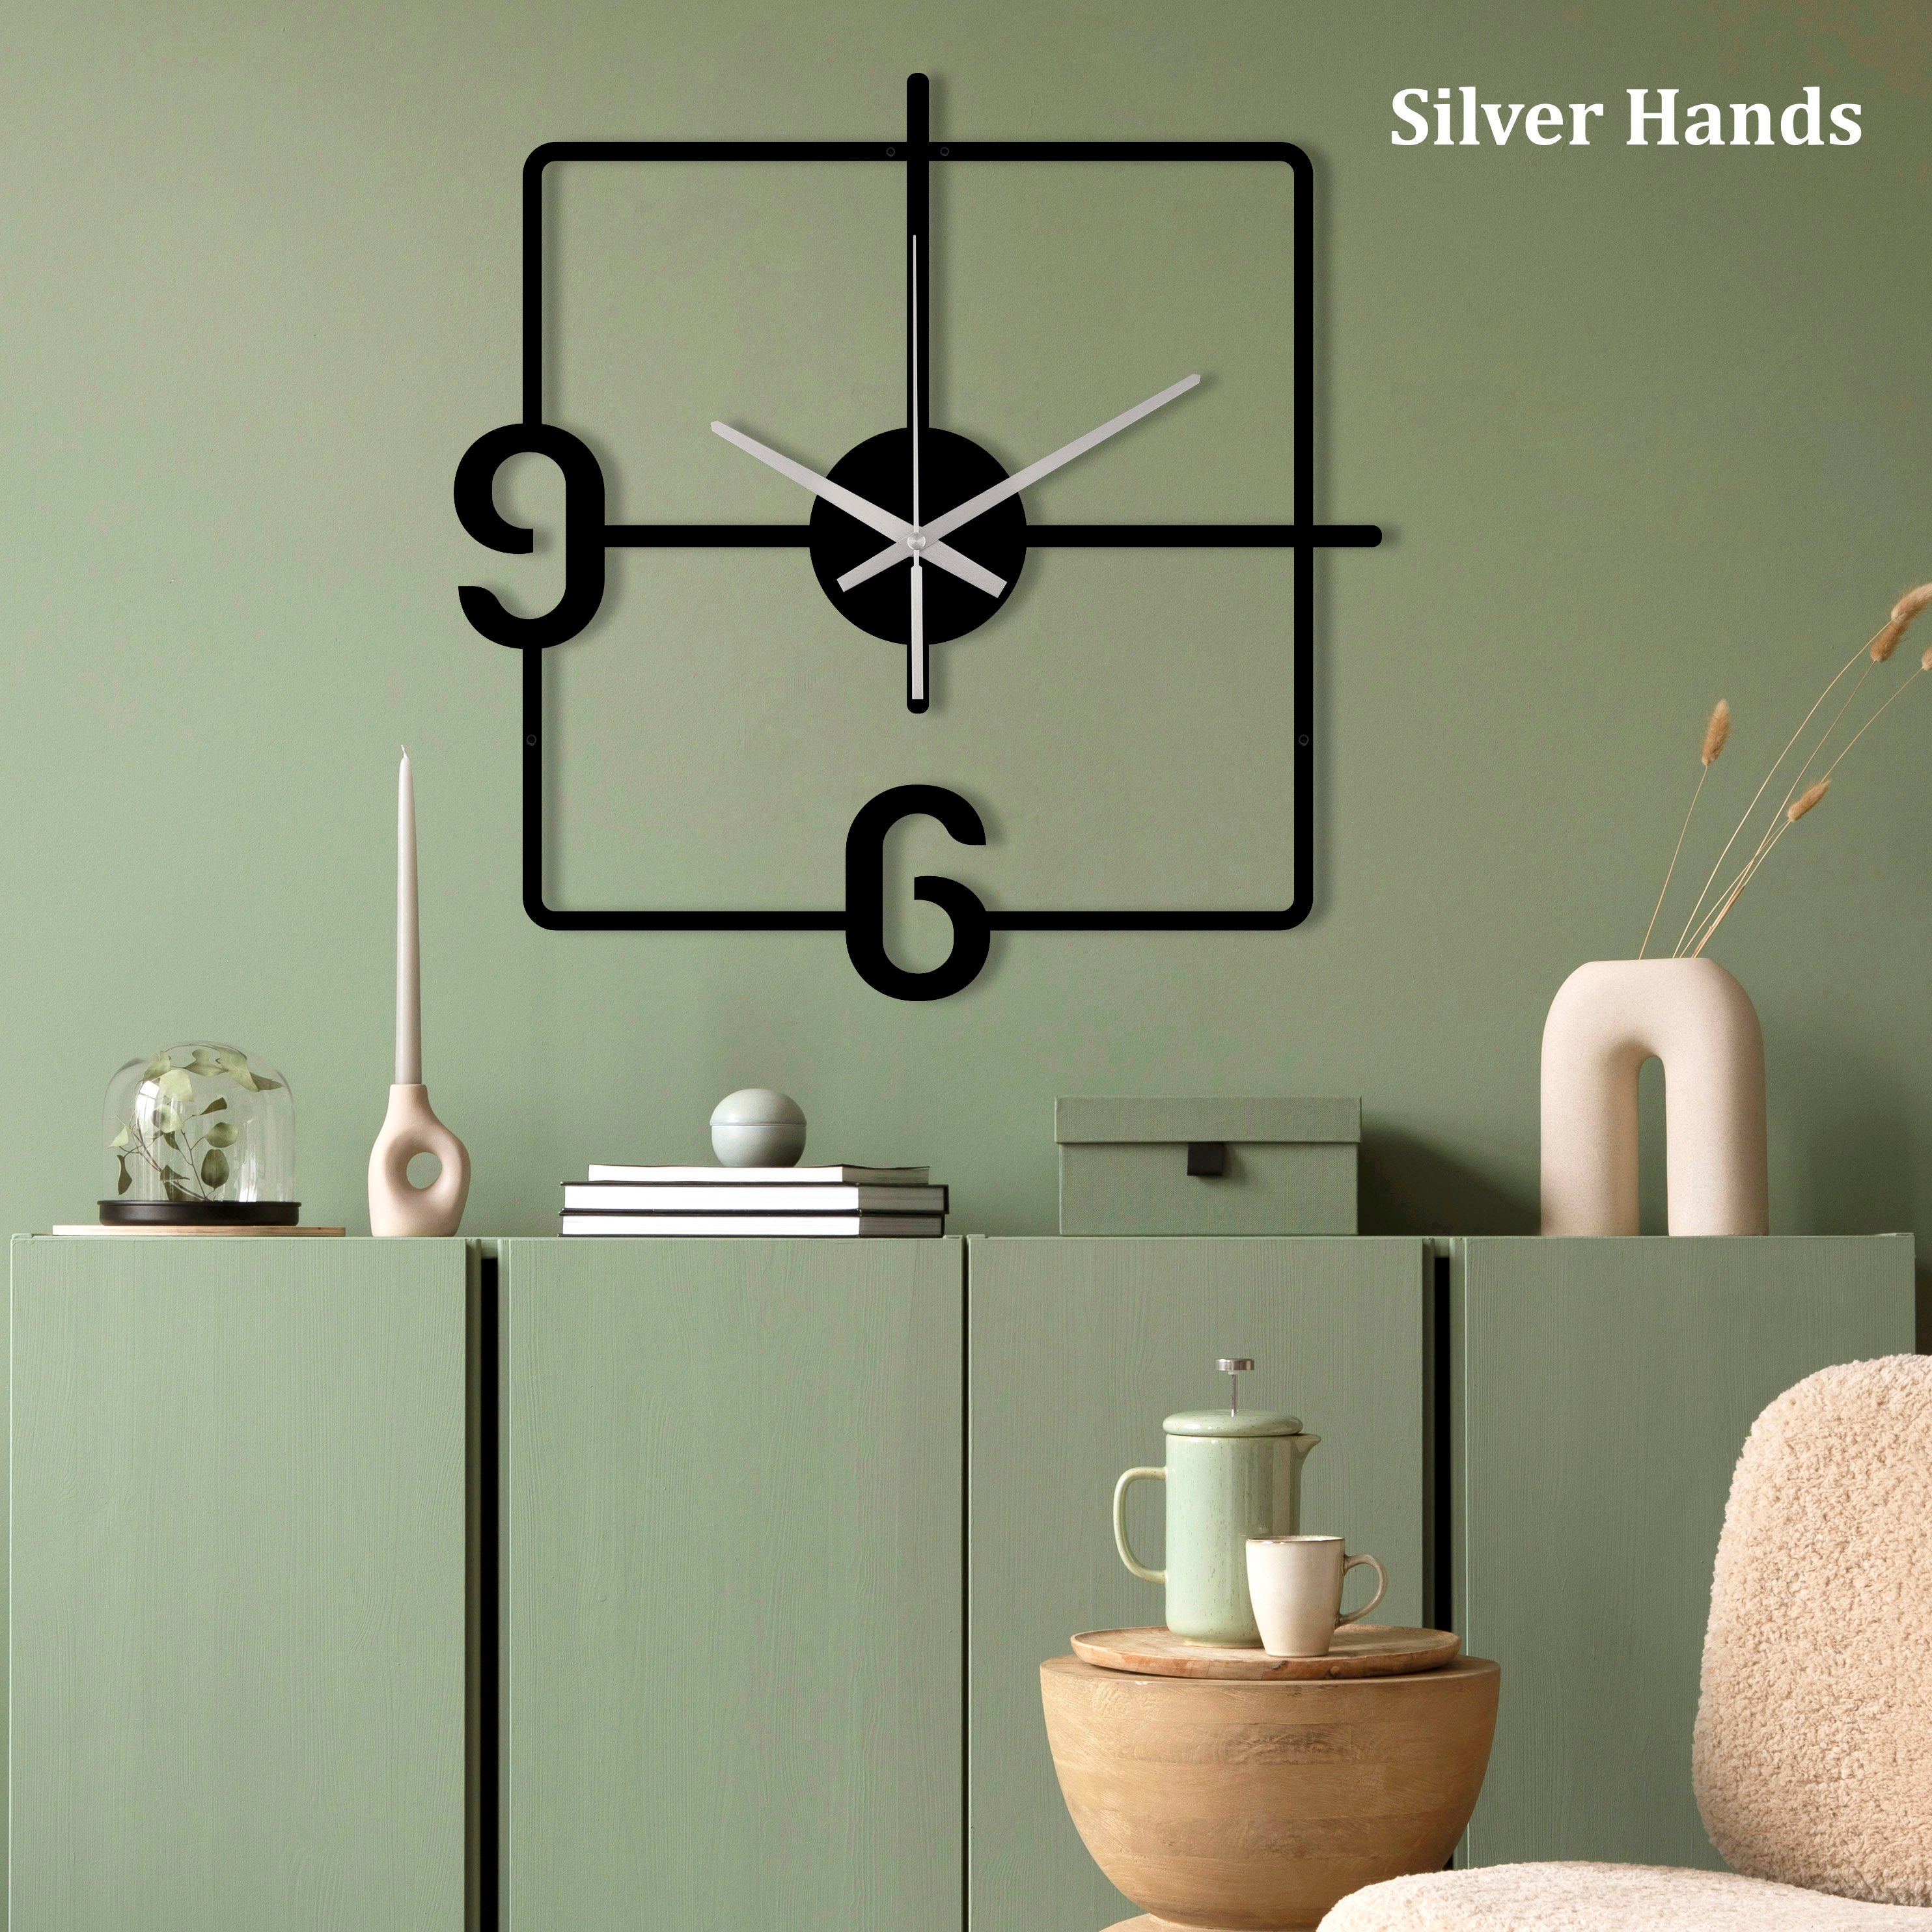 Large Square Wall Clock, Oversized Wall Clock, Unique Wall Clock, Minimalist Clock, Black Wall Clock, Metal Wall Clock, Silent Wall Clock